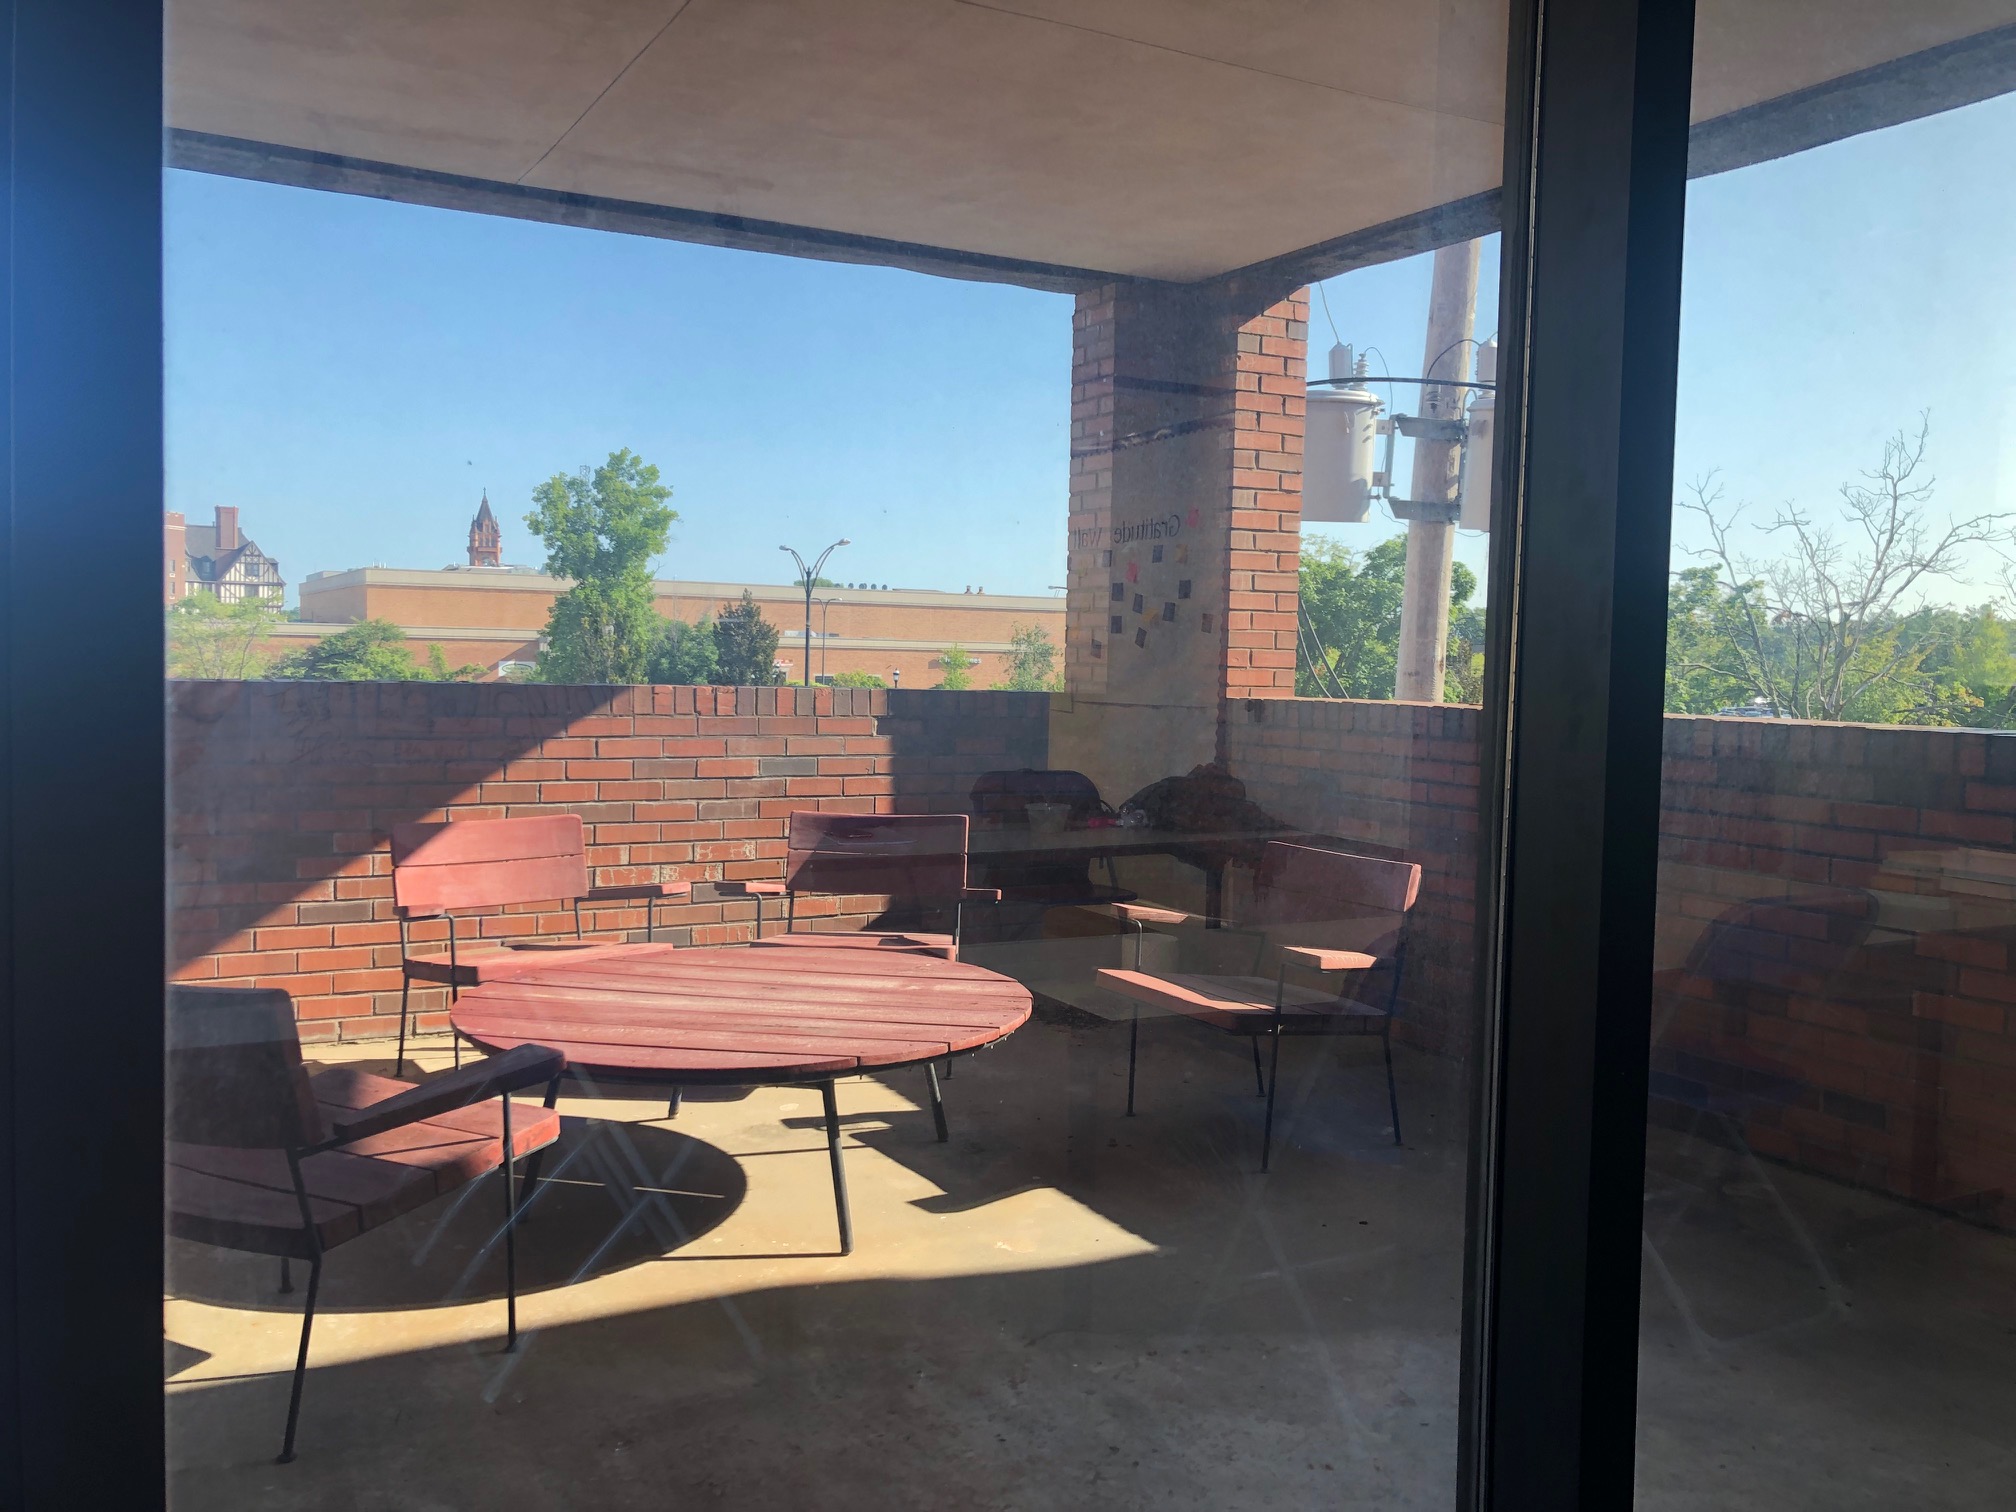 The outdoor space is seen through a window, showing a large circular coffee table and four large brown outdoor chairs with arms. Photo by Alyssa Buckley.